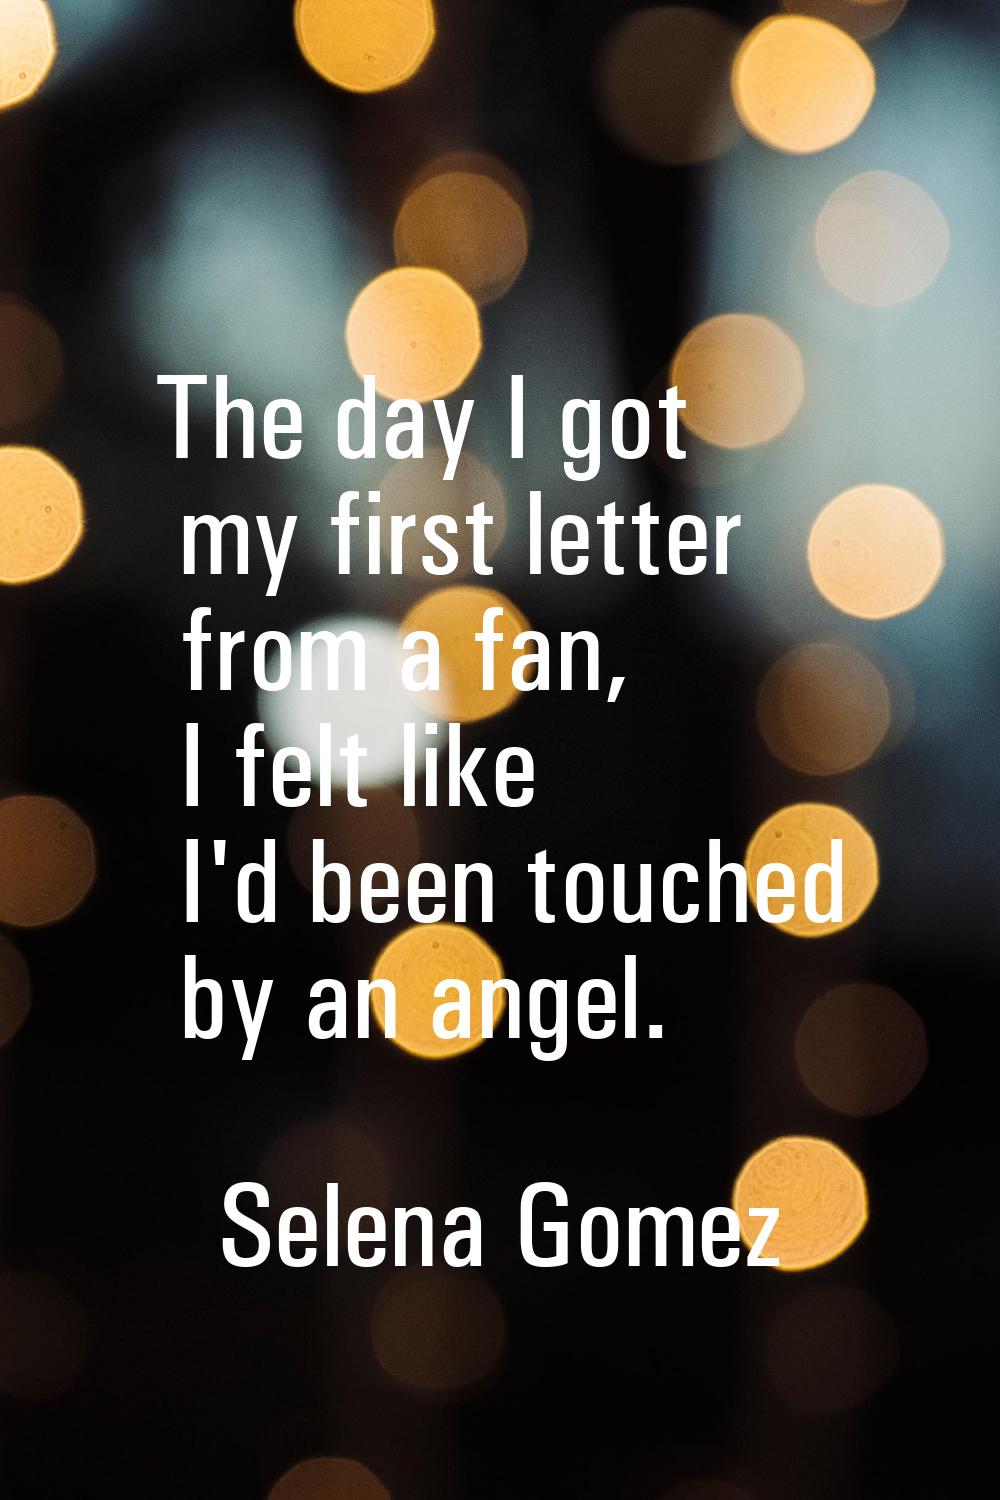 The day I got my first letter from a fan, I felt like I'd been touched by an angel.